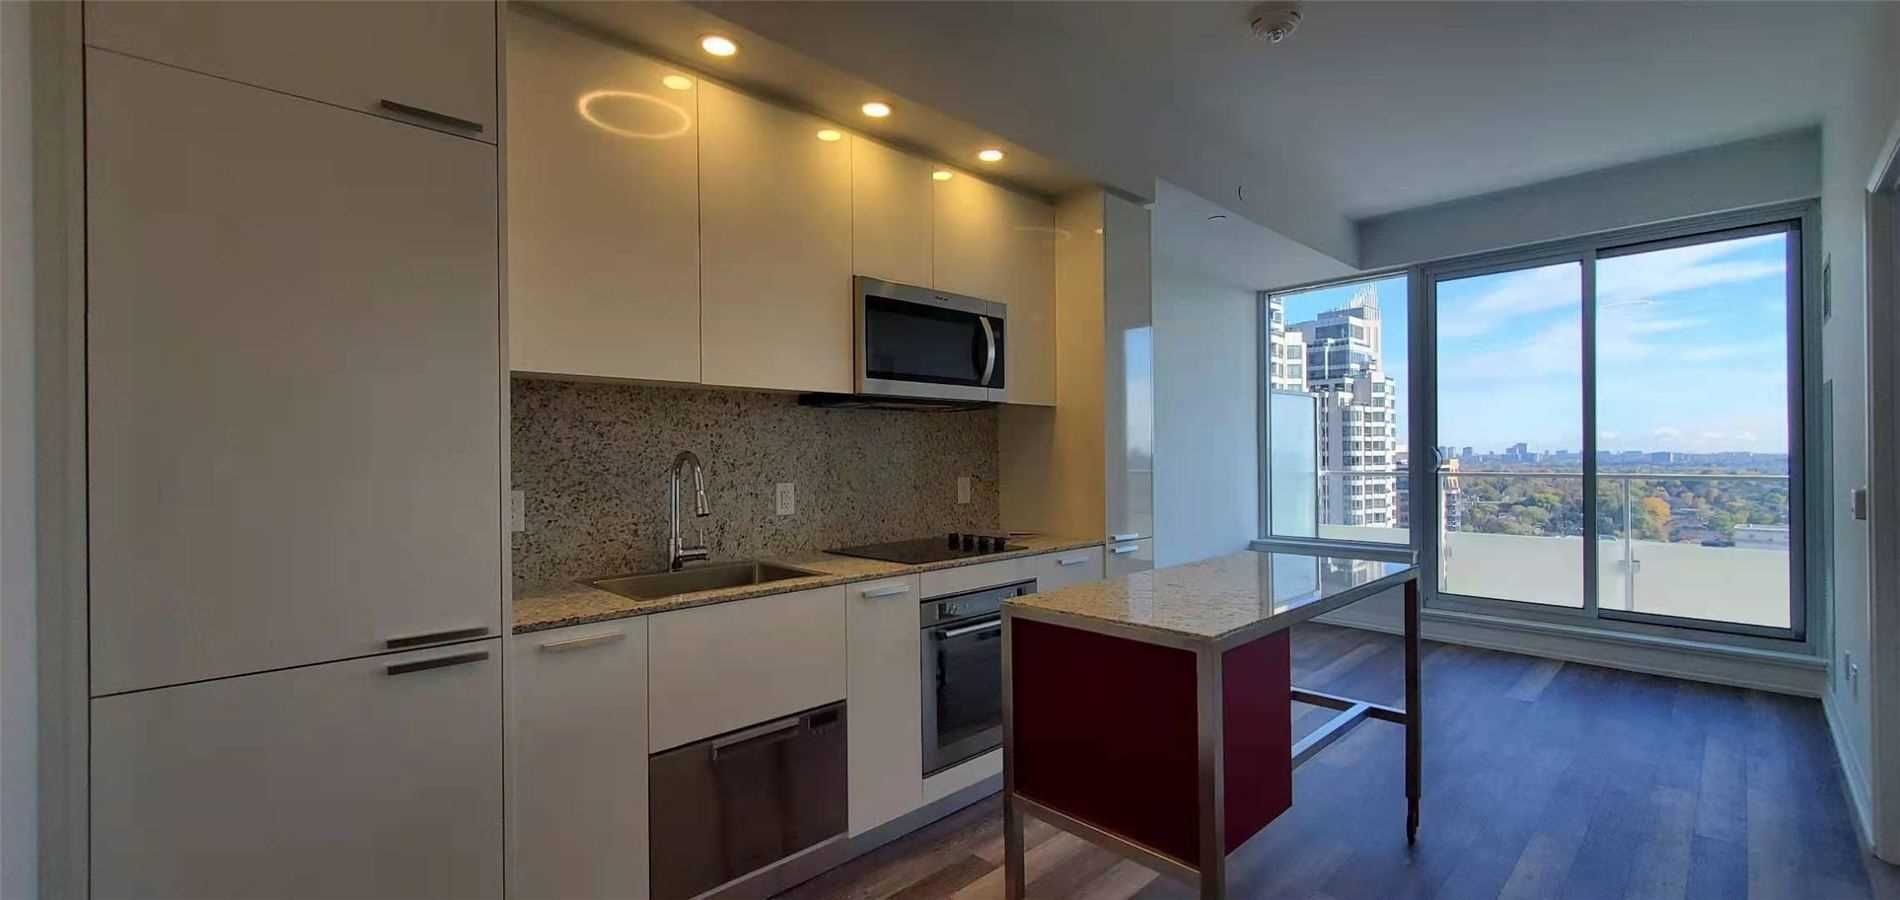 Main Photo: 2301 75 Canterbury Place in Toronto: Willowdale West Condo for lease (Toronto C07)  : MLS®# C5424412